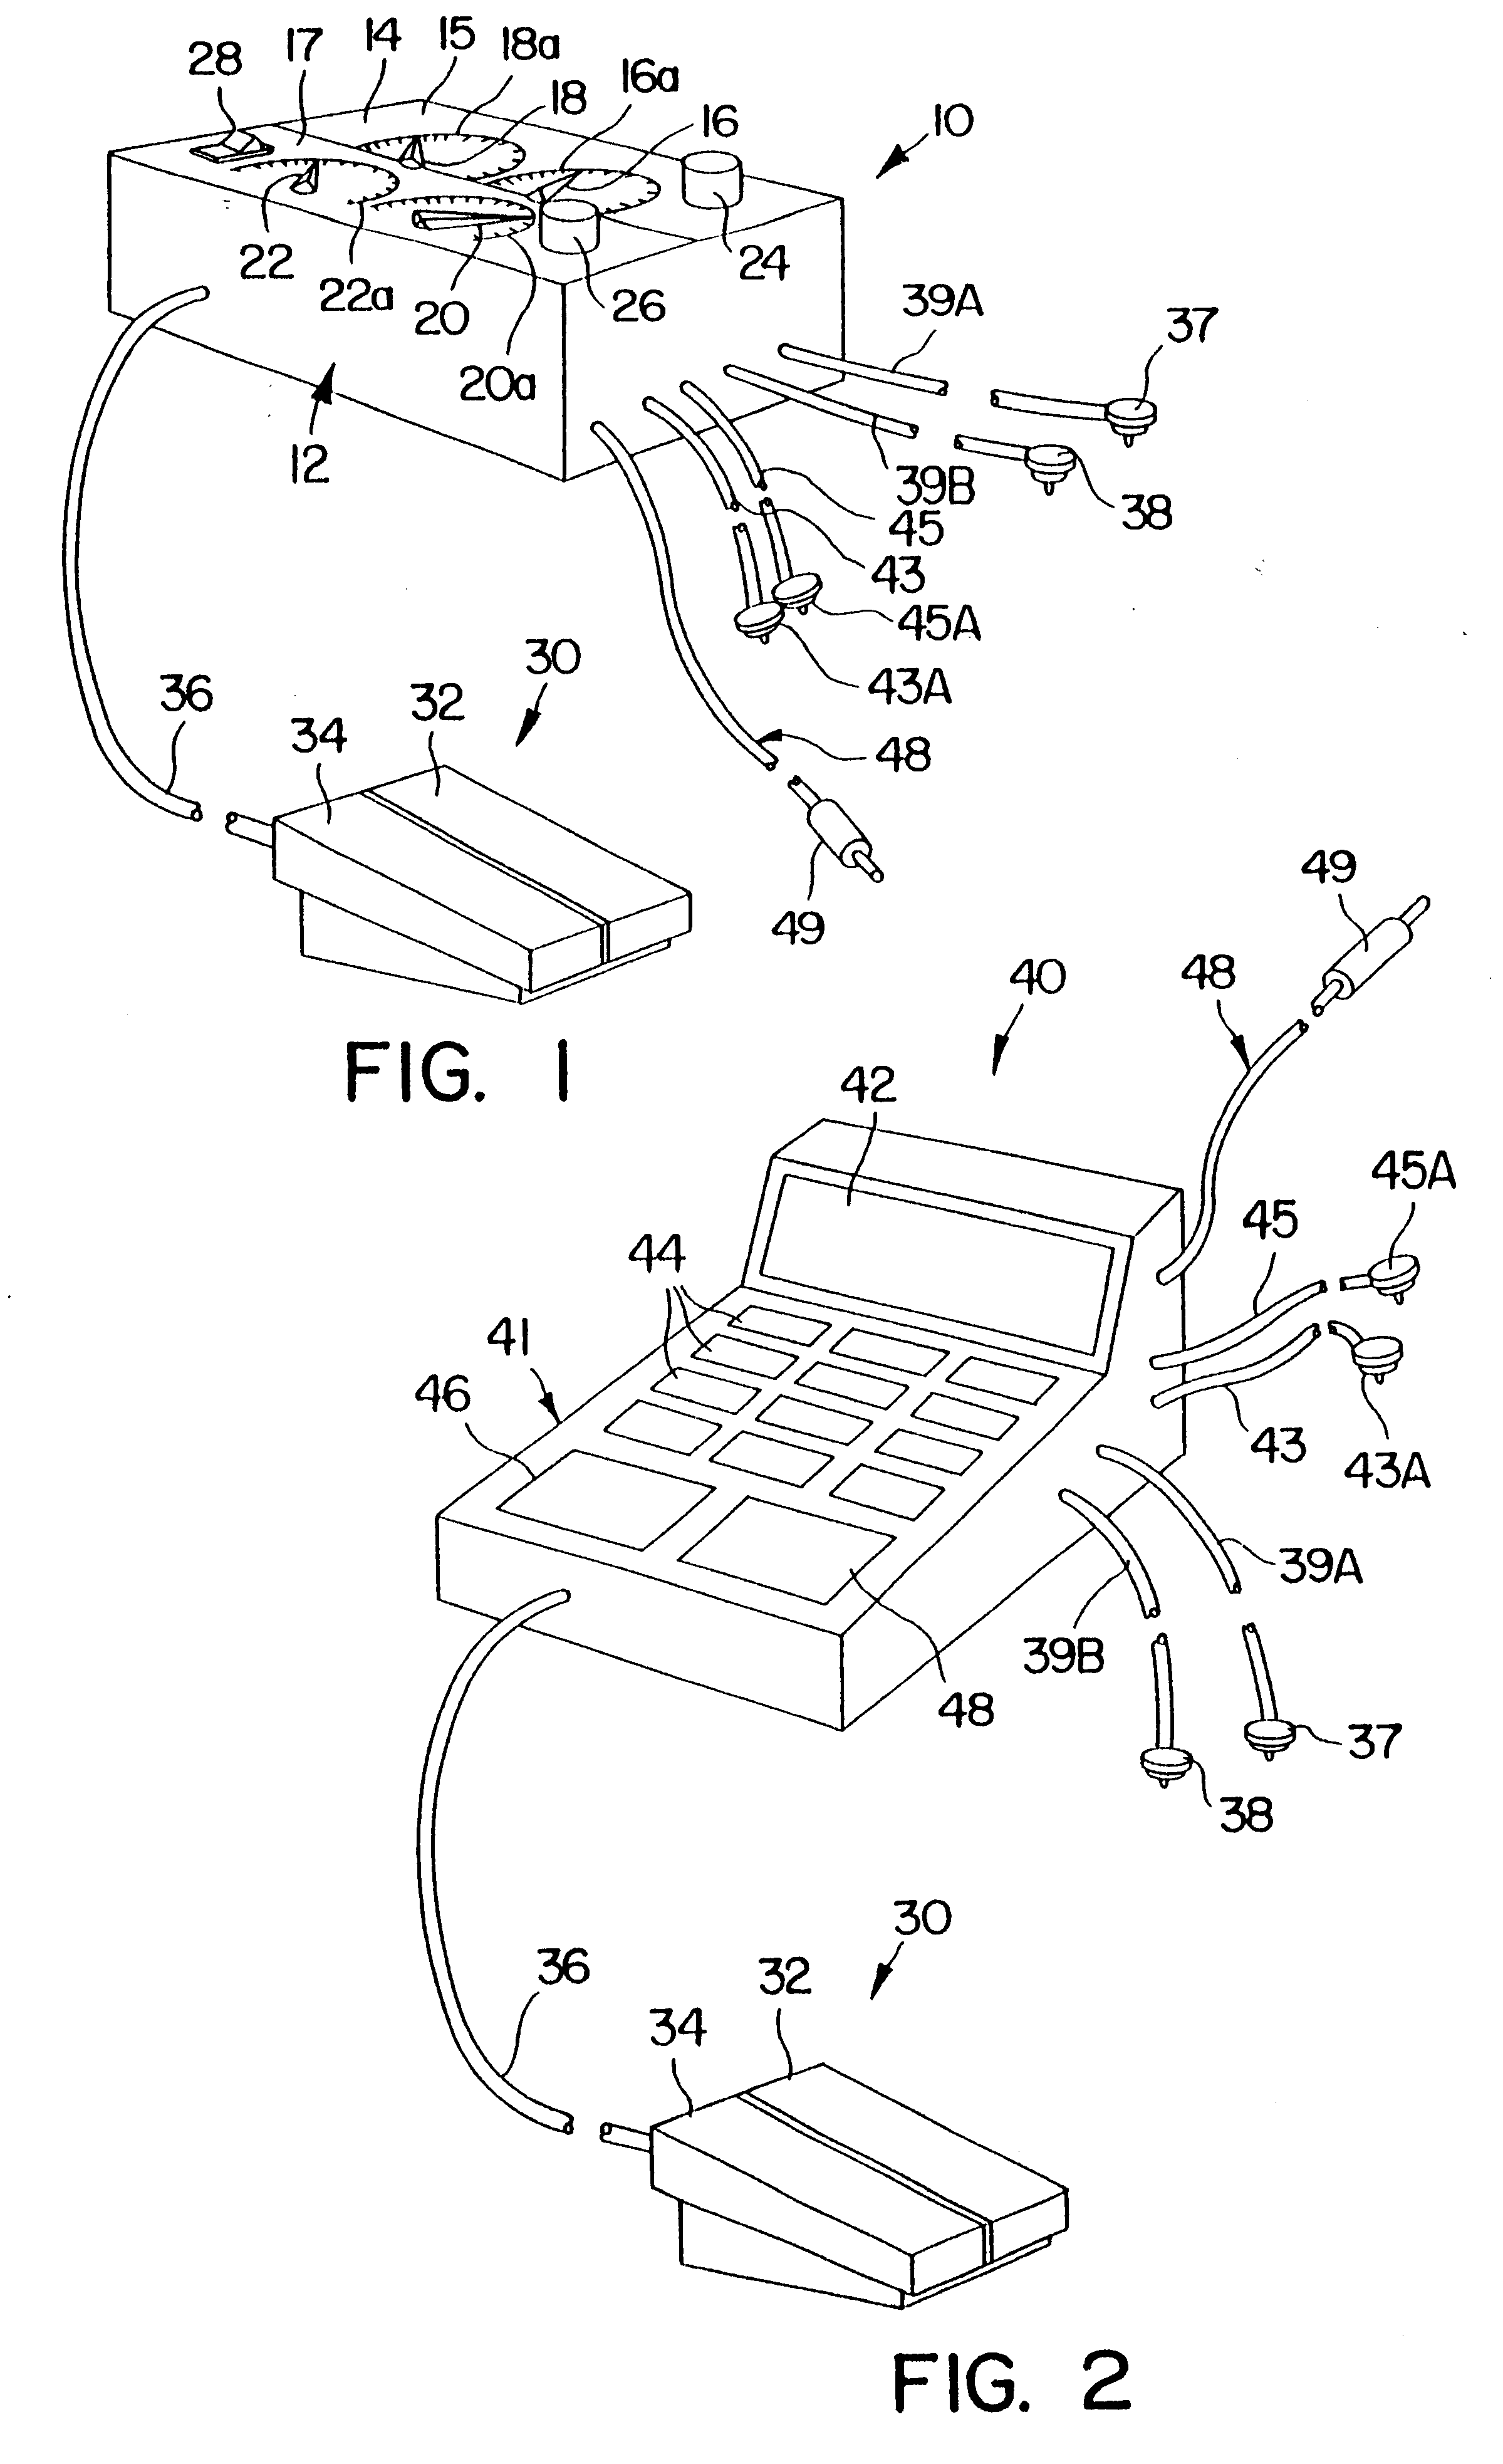 Method and device for electronically controlling the beating of a heart using venous electrical stimulation of nerve fibers